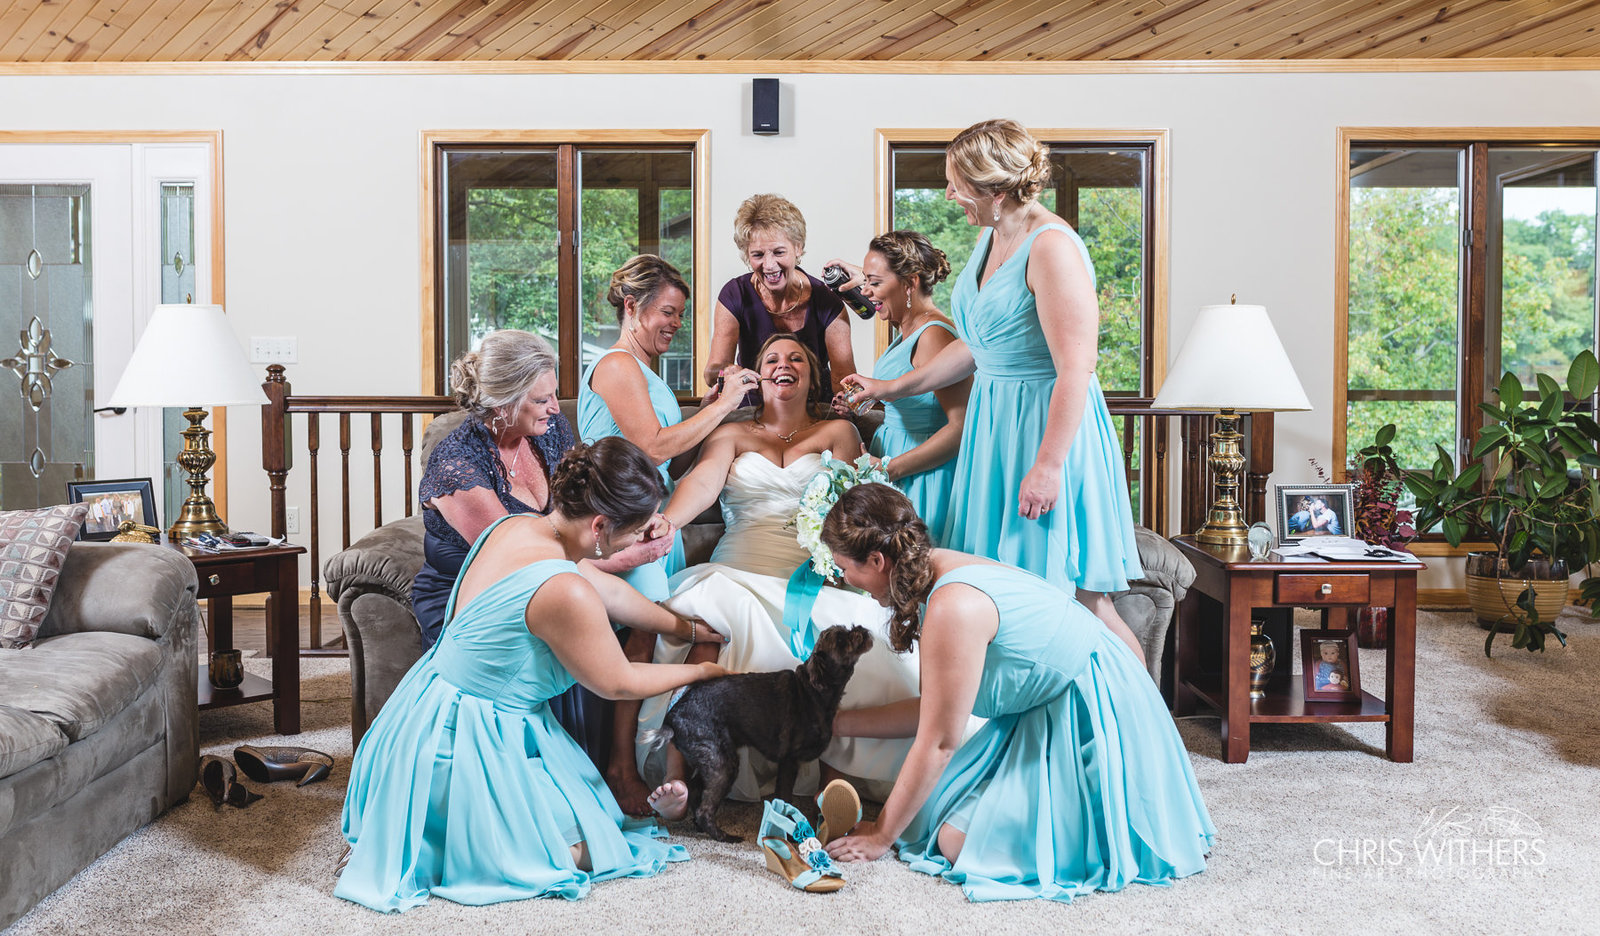 Springfield Illinois Wedding Photographer - Chris Withers Photography (138 of 159)